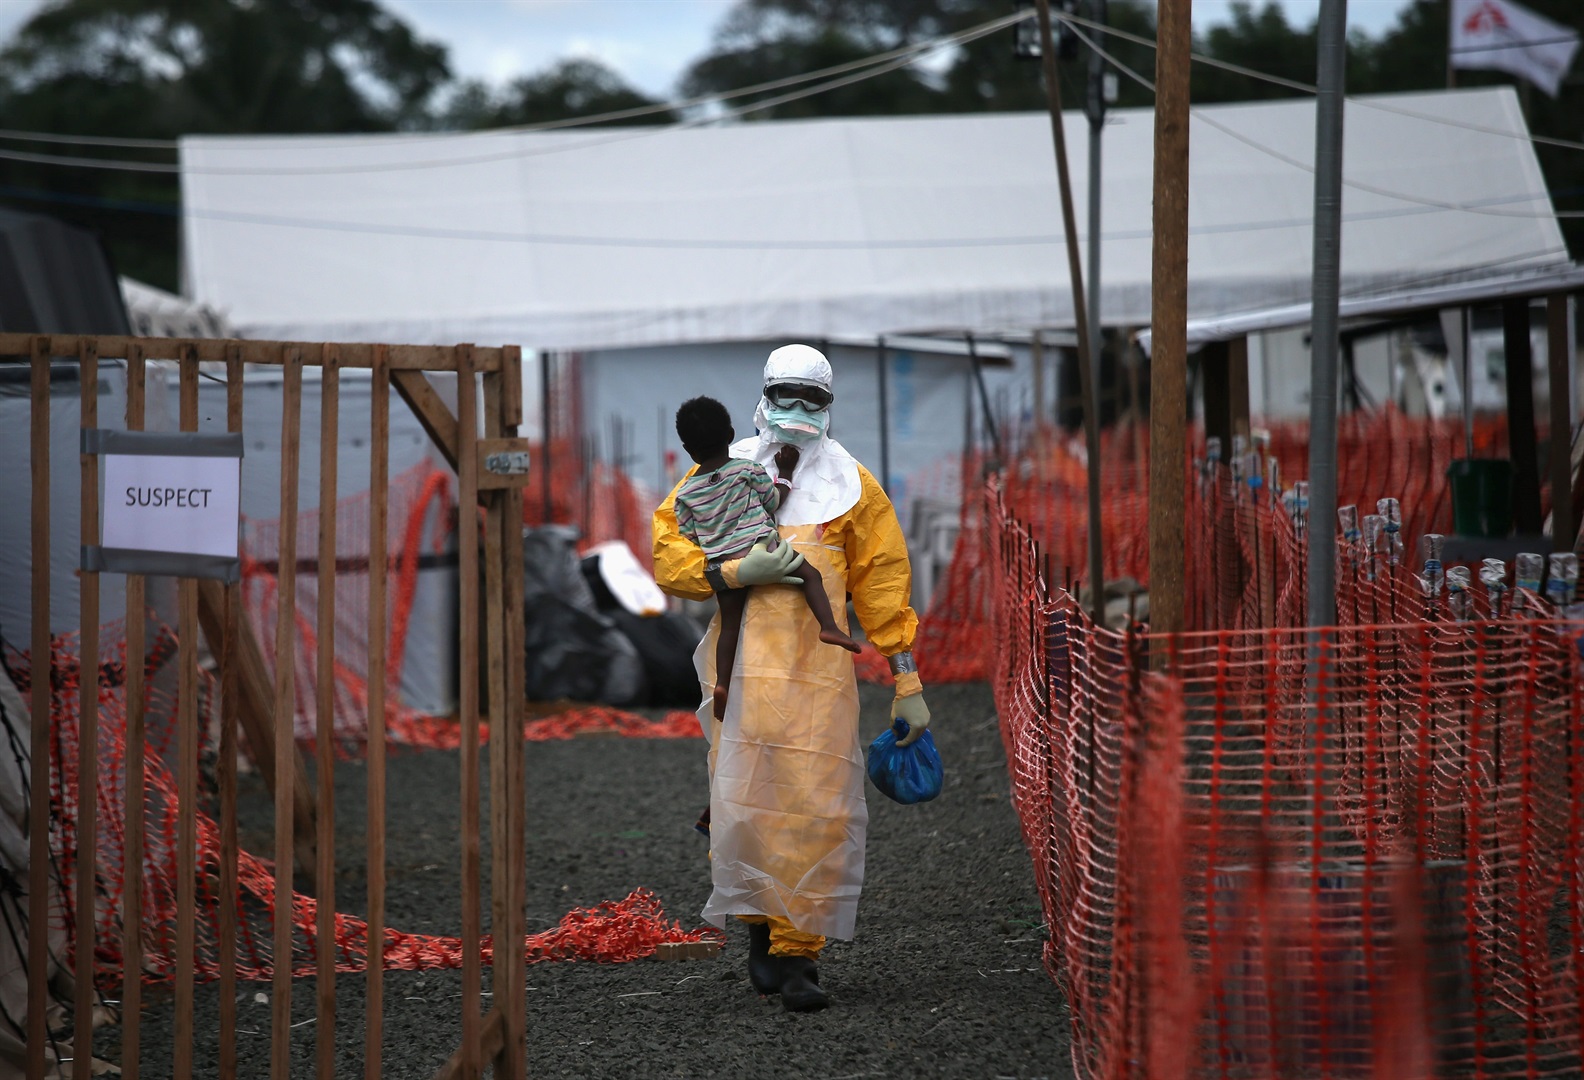 A Doctors Without Borders (MSF) health worker in protective clothing carries a child suspected of having Ebola.